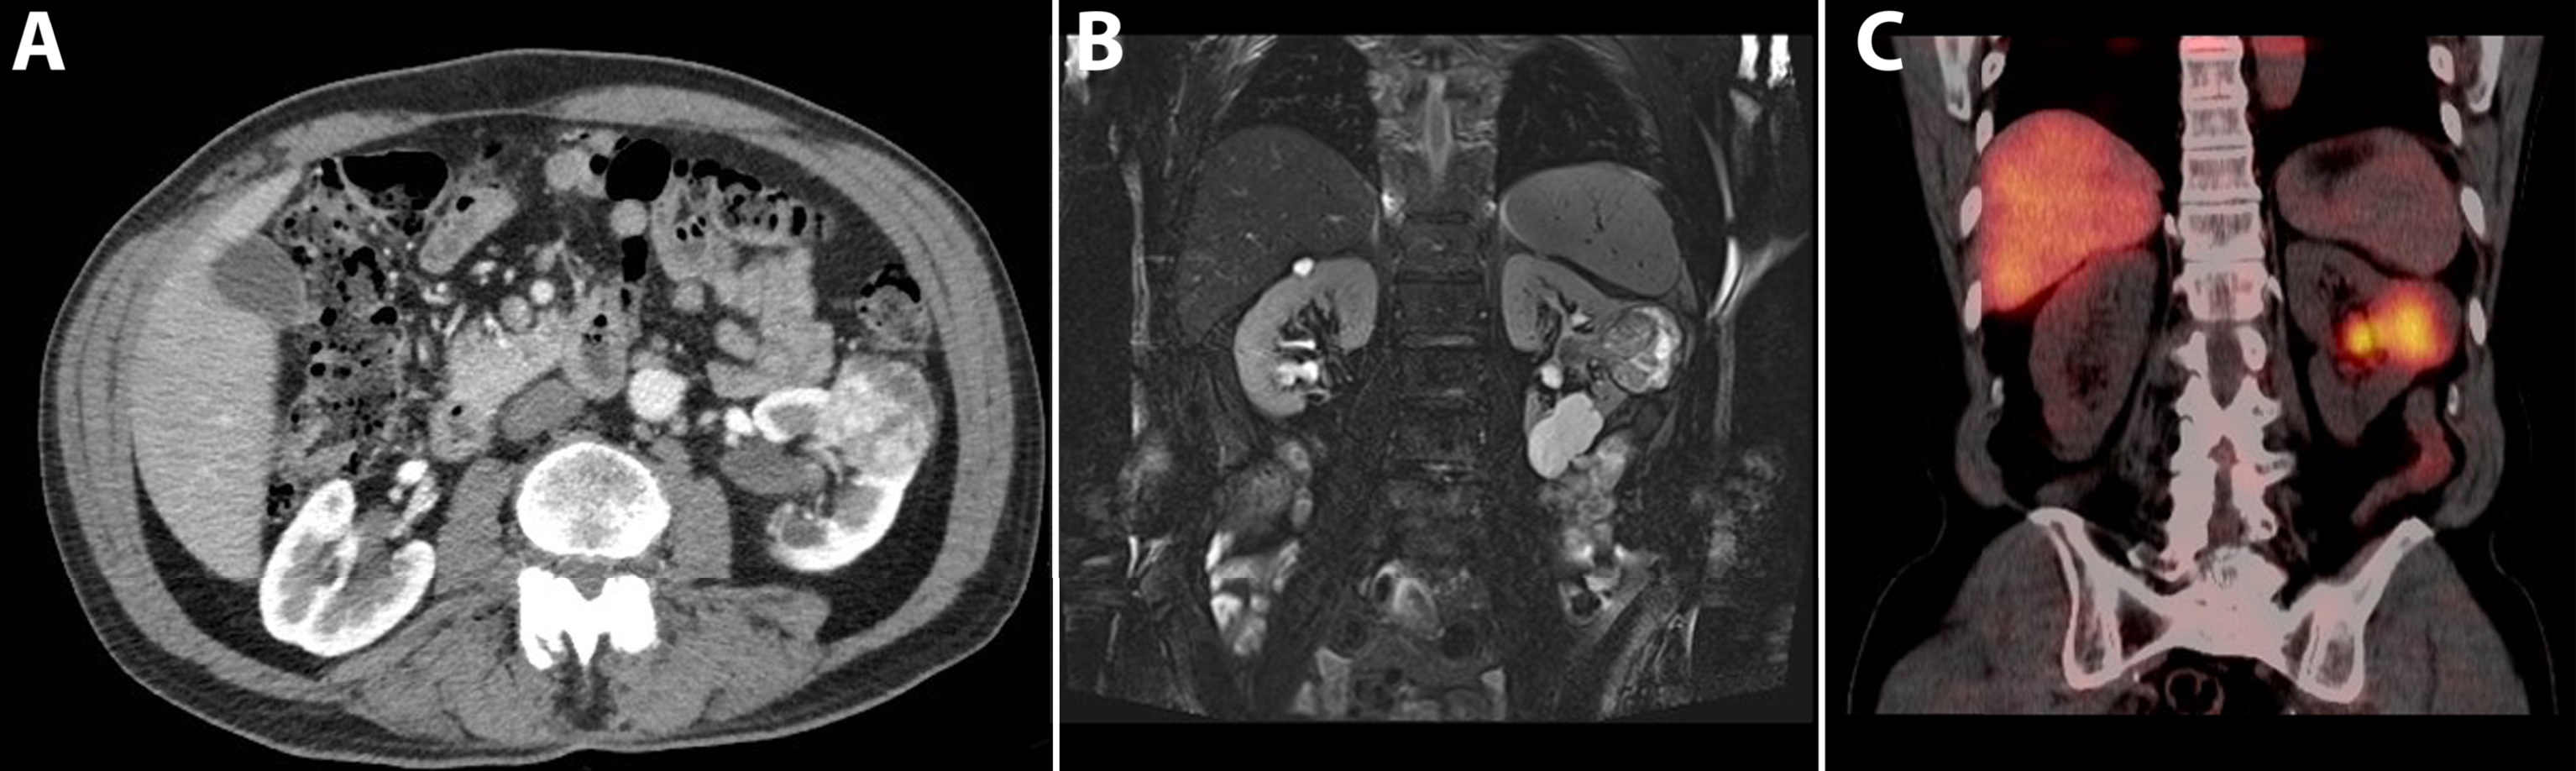 A 74-year-old male patient was evaluated for flank pain and hematuria. A screening ultrasound showed a hypervascular and hyperechoic renal mass of left kidney. A 3-phase CT scan showed an interlobular heterogeneous mass with a maximum diameter of 56 mm in the left renal cortex. Avid enhancement of the solid parts is seen in the corticomedullary phase, especially in the solid tumor parts, making this tumor suggestive for renal cell carcinoma.(A) An additional MRI with T2-weighted fat saturated sequences acquired in the coronal plane showed a heterogeneous renal mass with growth towards the renal pelvis. Note the simple cysts in the lower pole. (B) Additional SPECT/CT 5 days after administration of 111-Indium-Girentuximab shows targeting of the renal tumor making a clear cell subtype highly likely. A second hot spot in the renal pelvis was noted. (C) Histopathology after laparoscopic radical nephrectomy confirmed the diagnosis of a 50 mm large, Furhman grade 3, clear cell renal cell carcinoma.